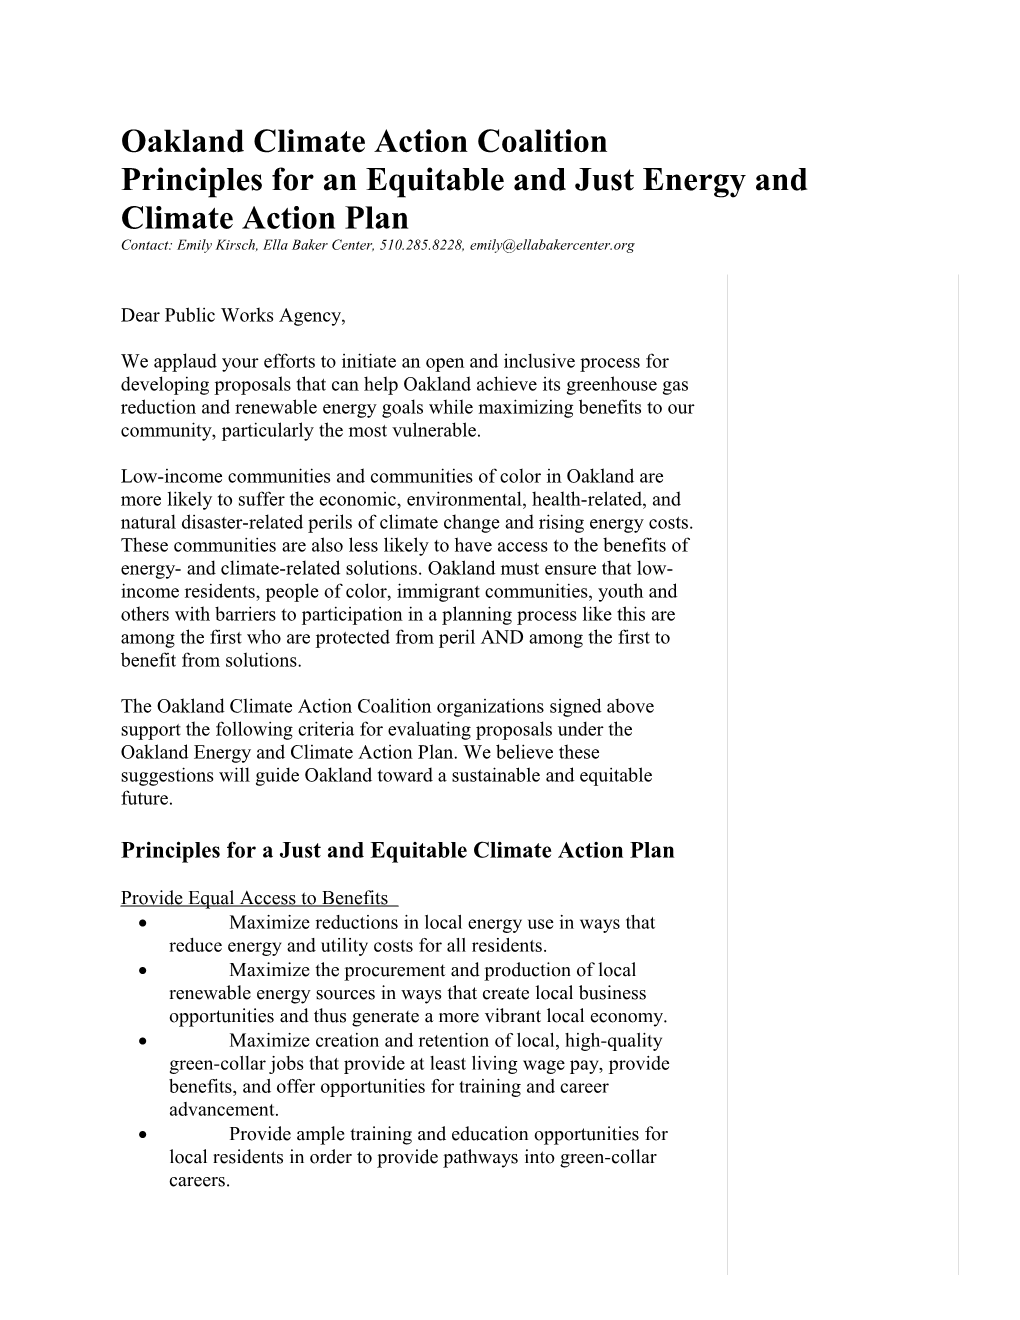 Re: Support Criteria for Evaluating Oakland Energy and Climate Action Proposals (ECAP)